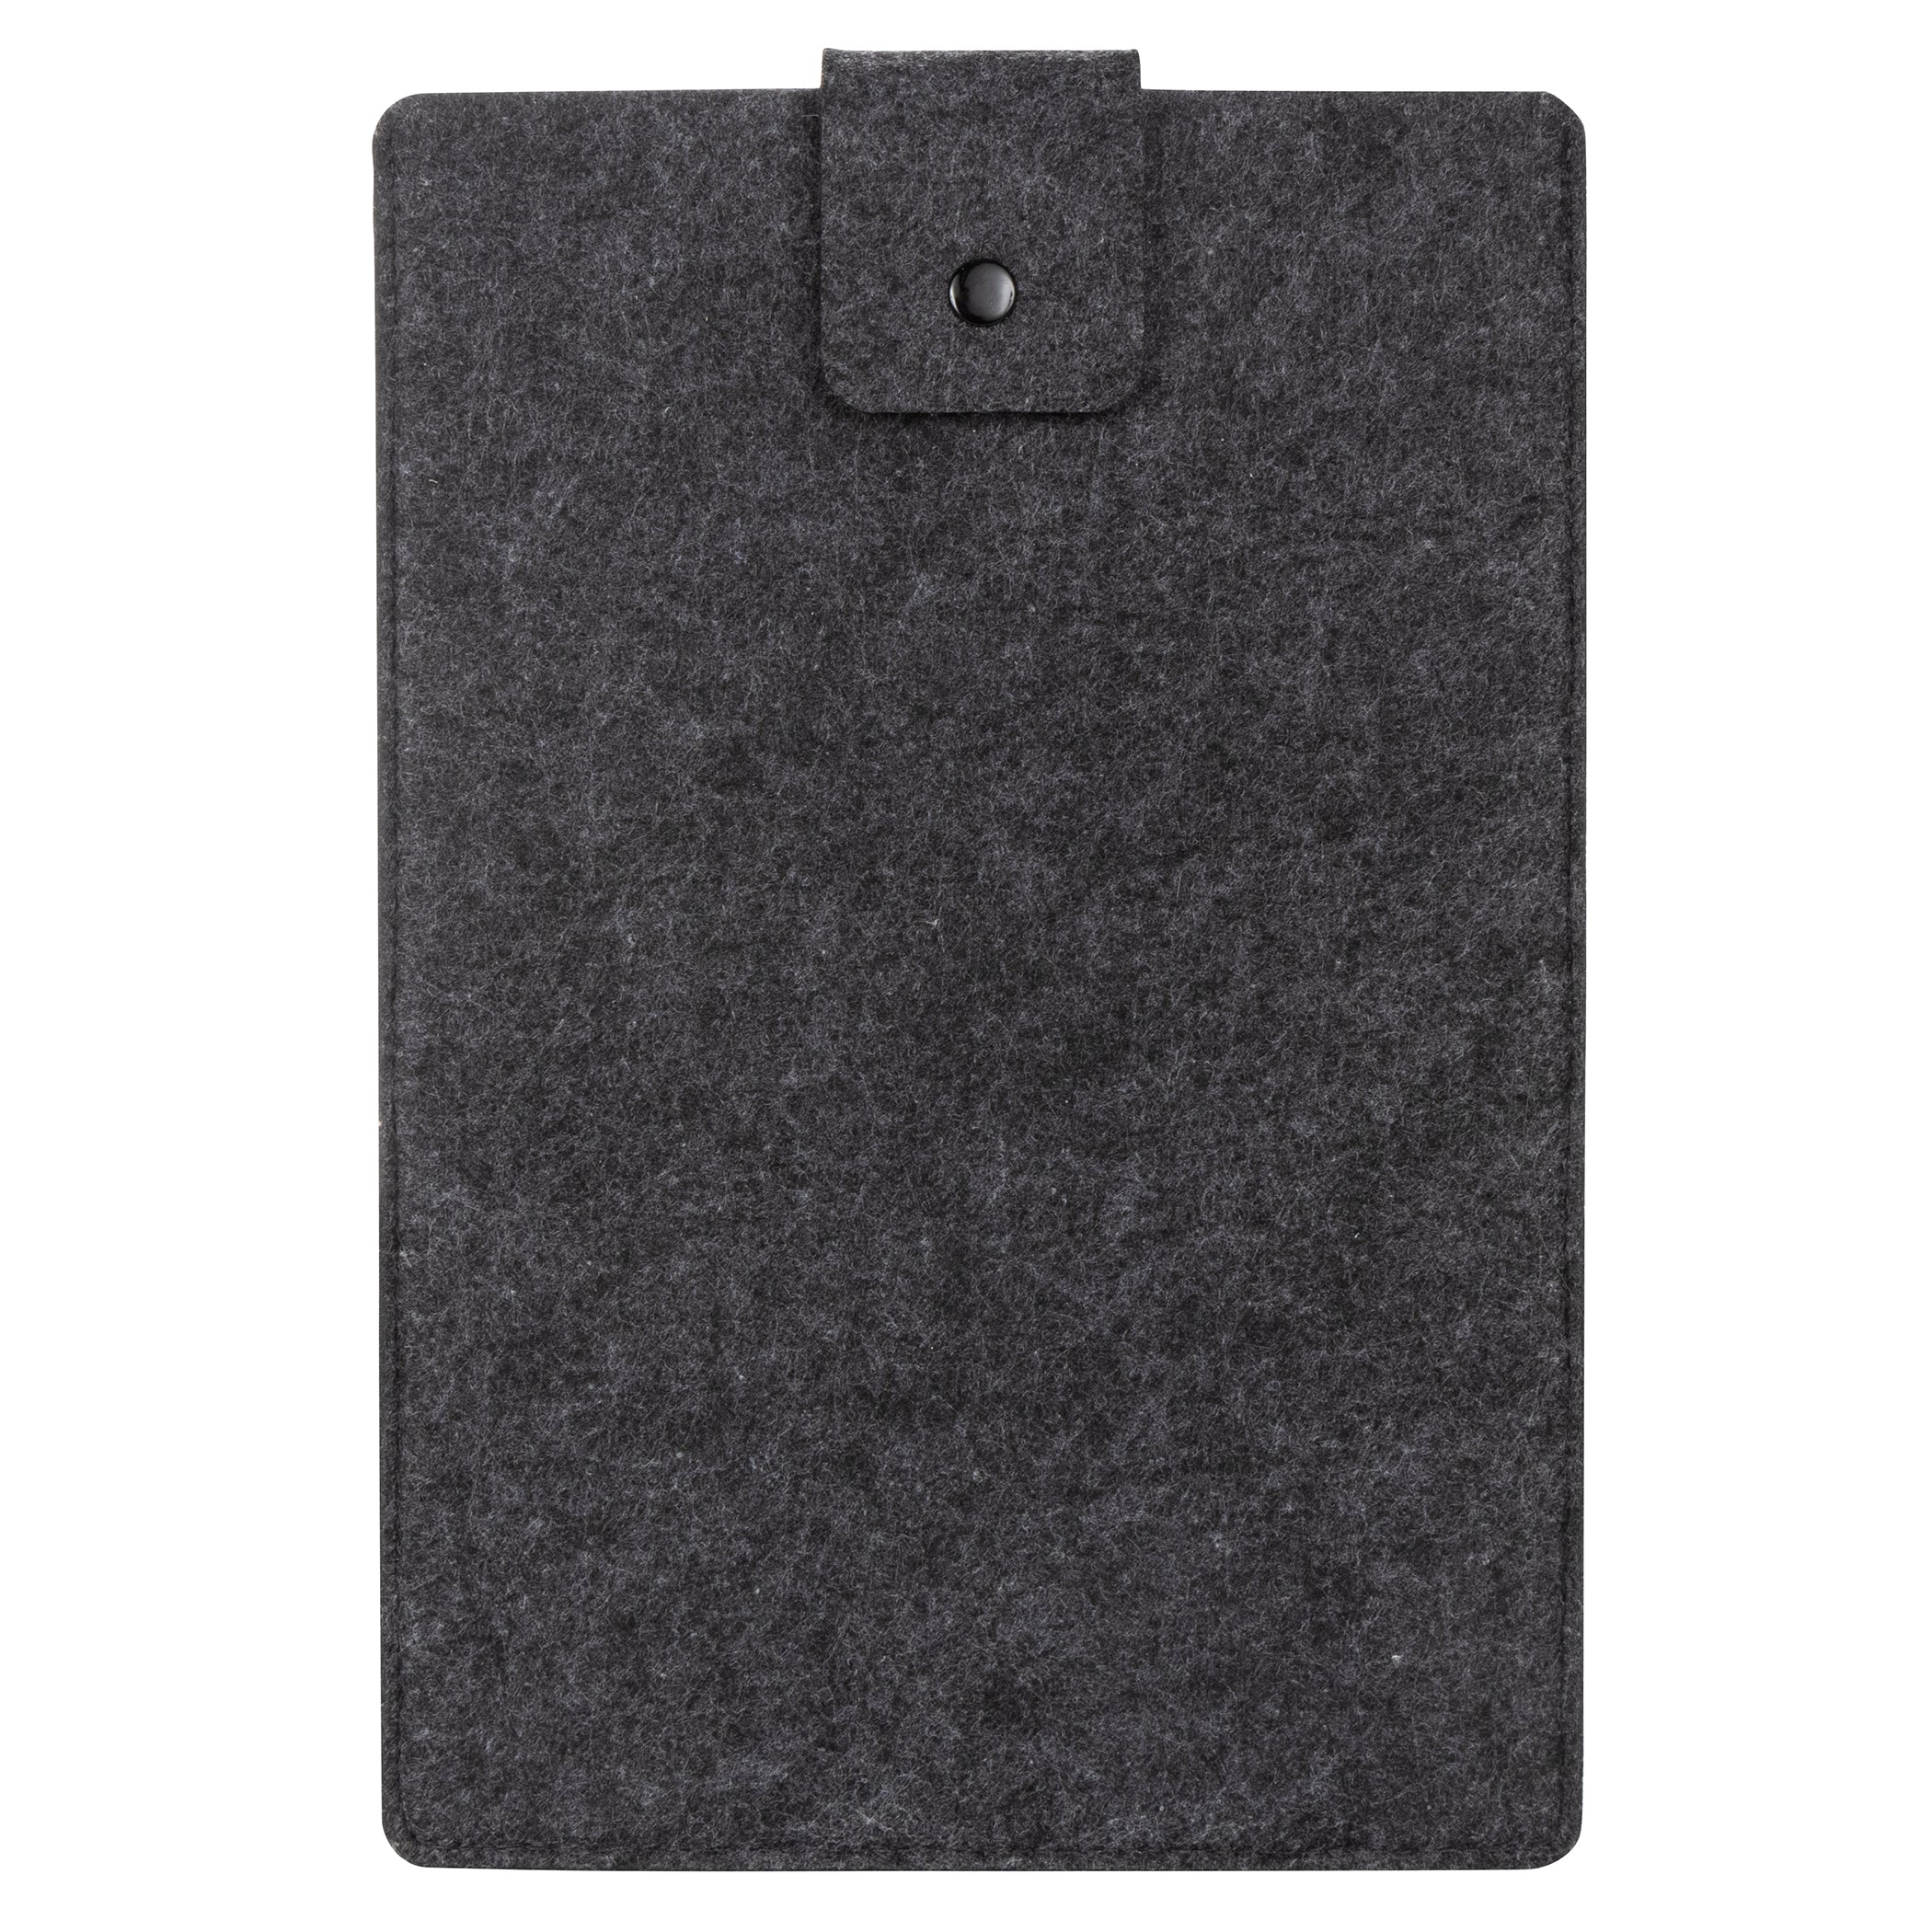 Charcoal Gray Felt Tablet Sleeve Carrying Case by Sammy and Lou?